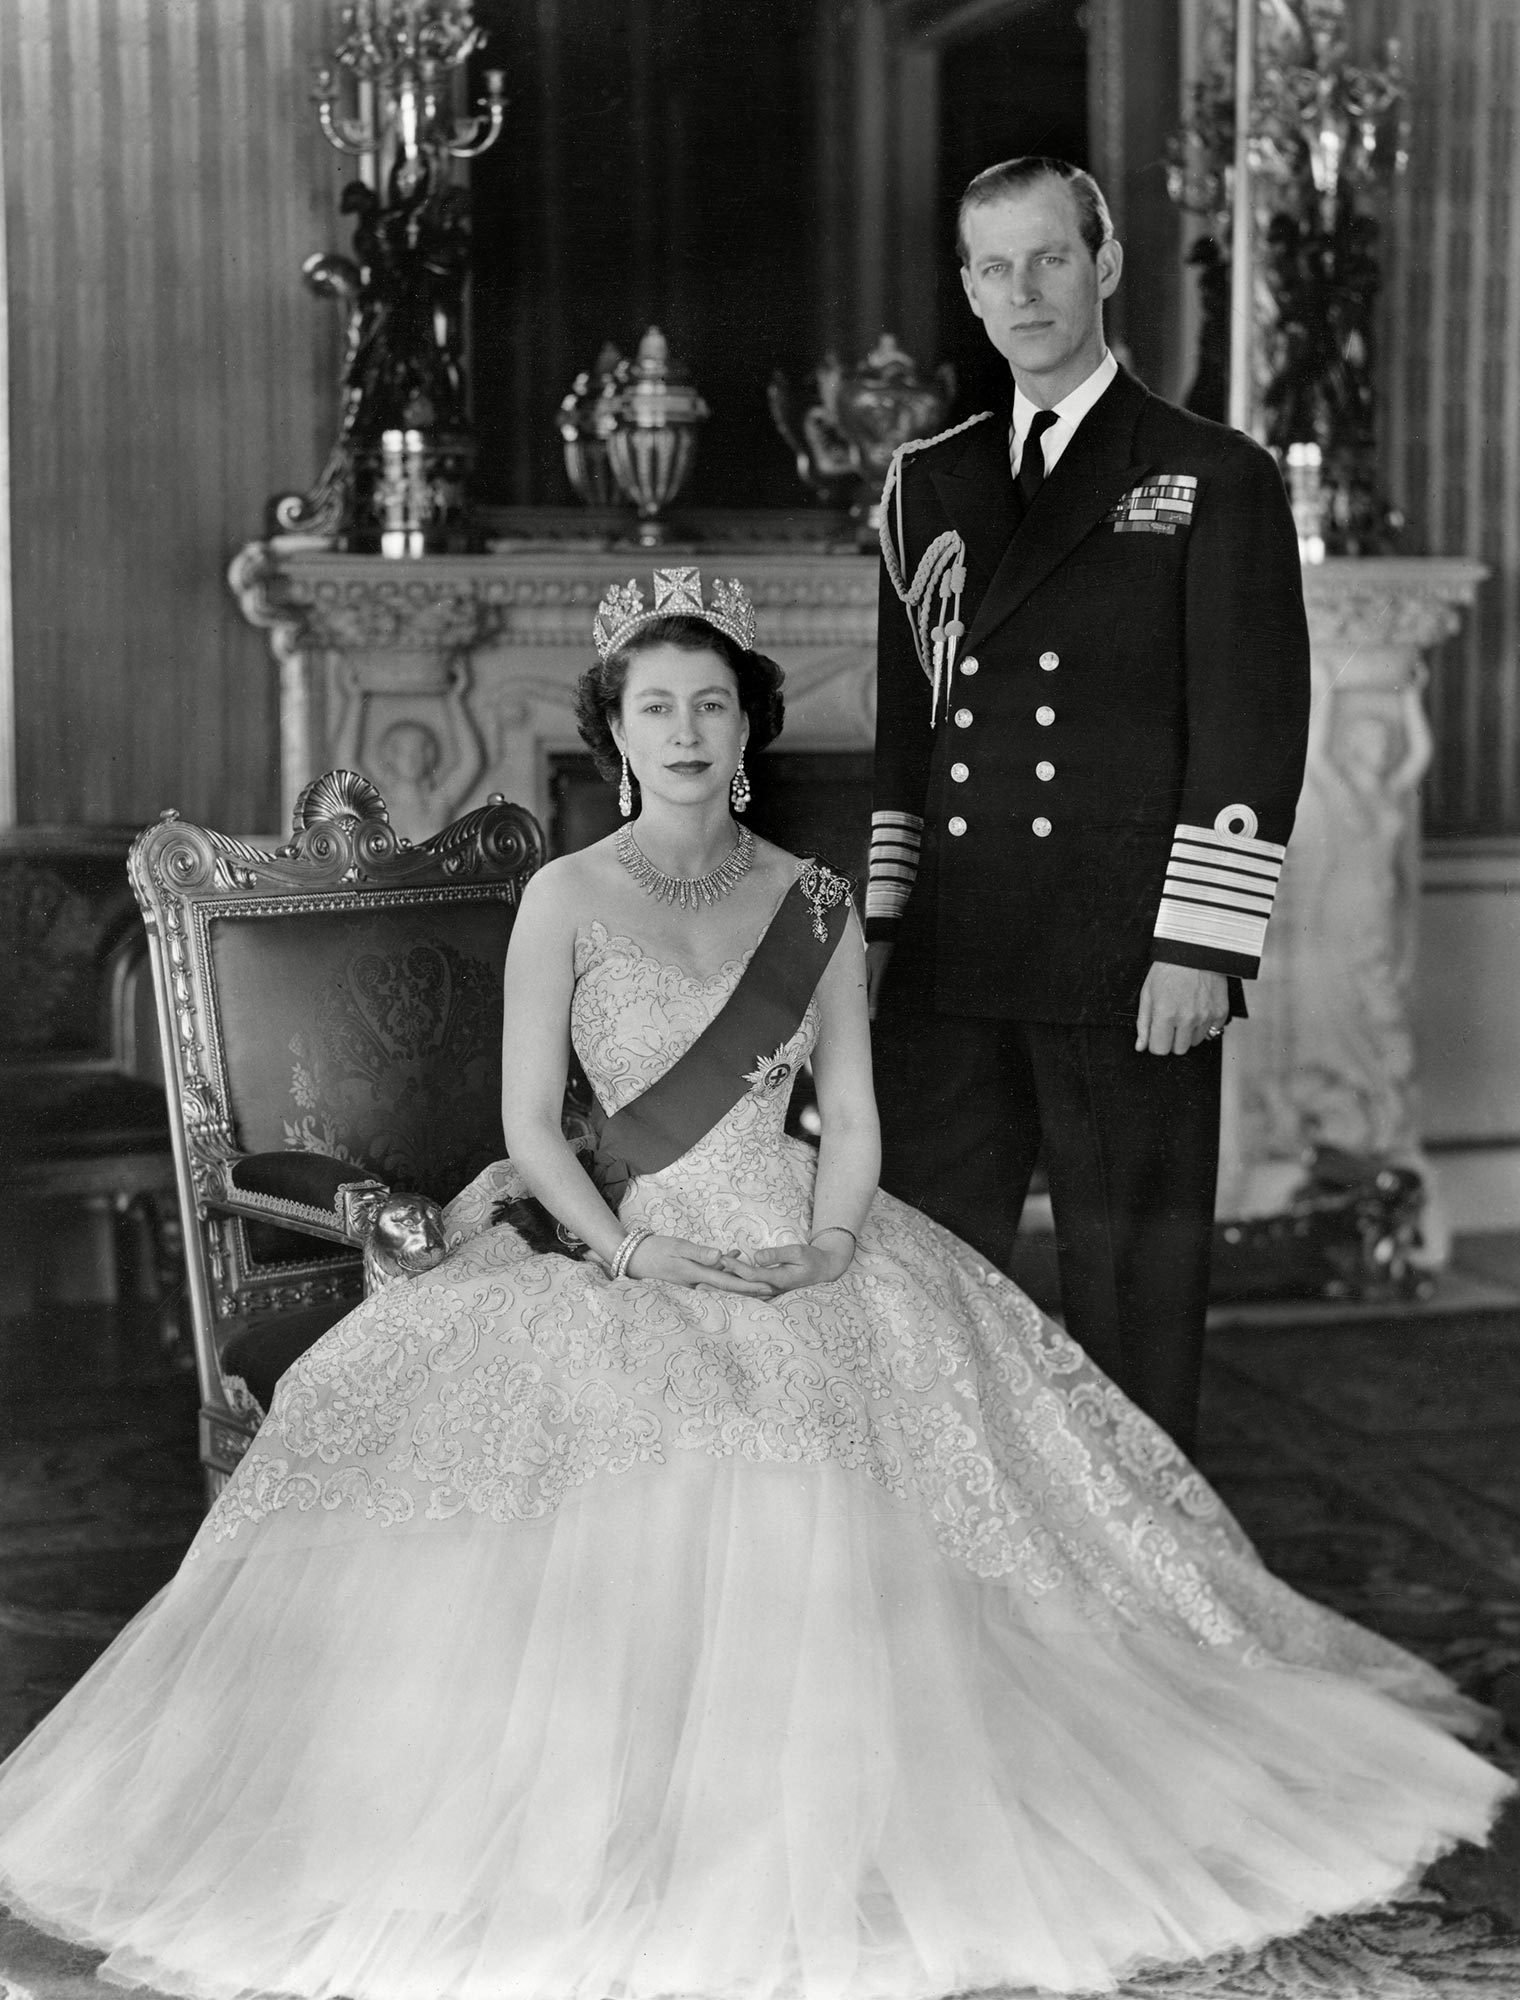 Royals Who Married Their Relatives | Reader's Digest